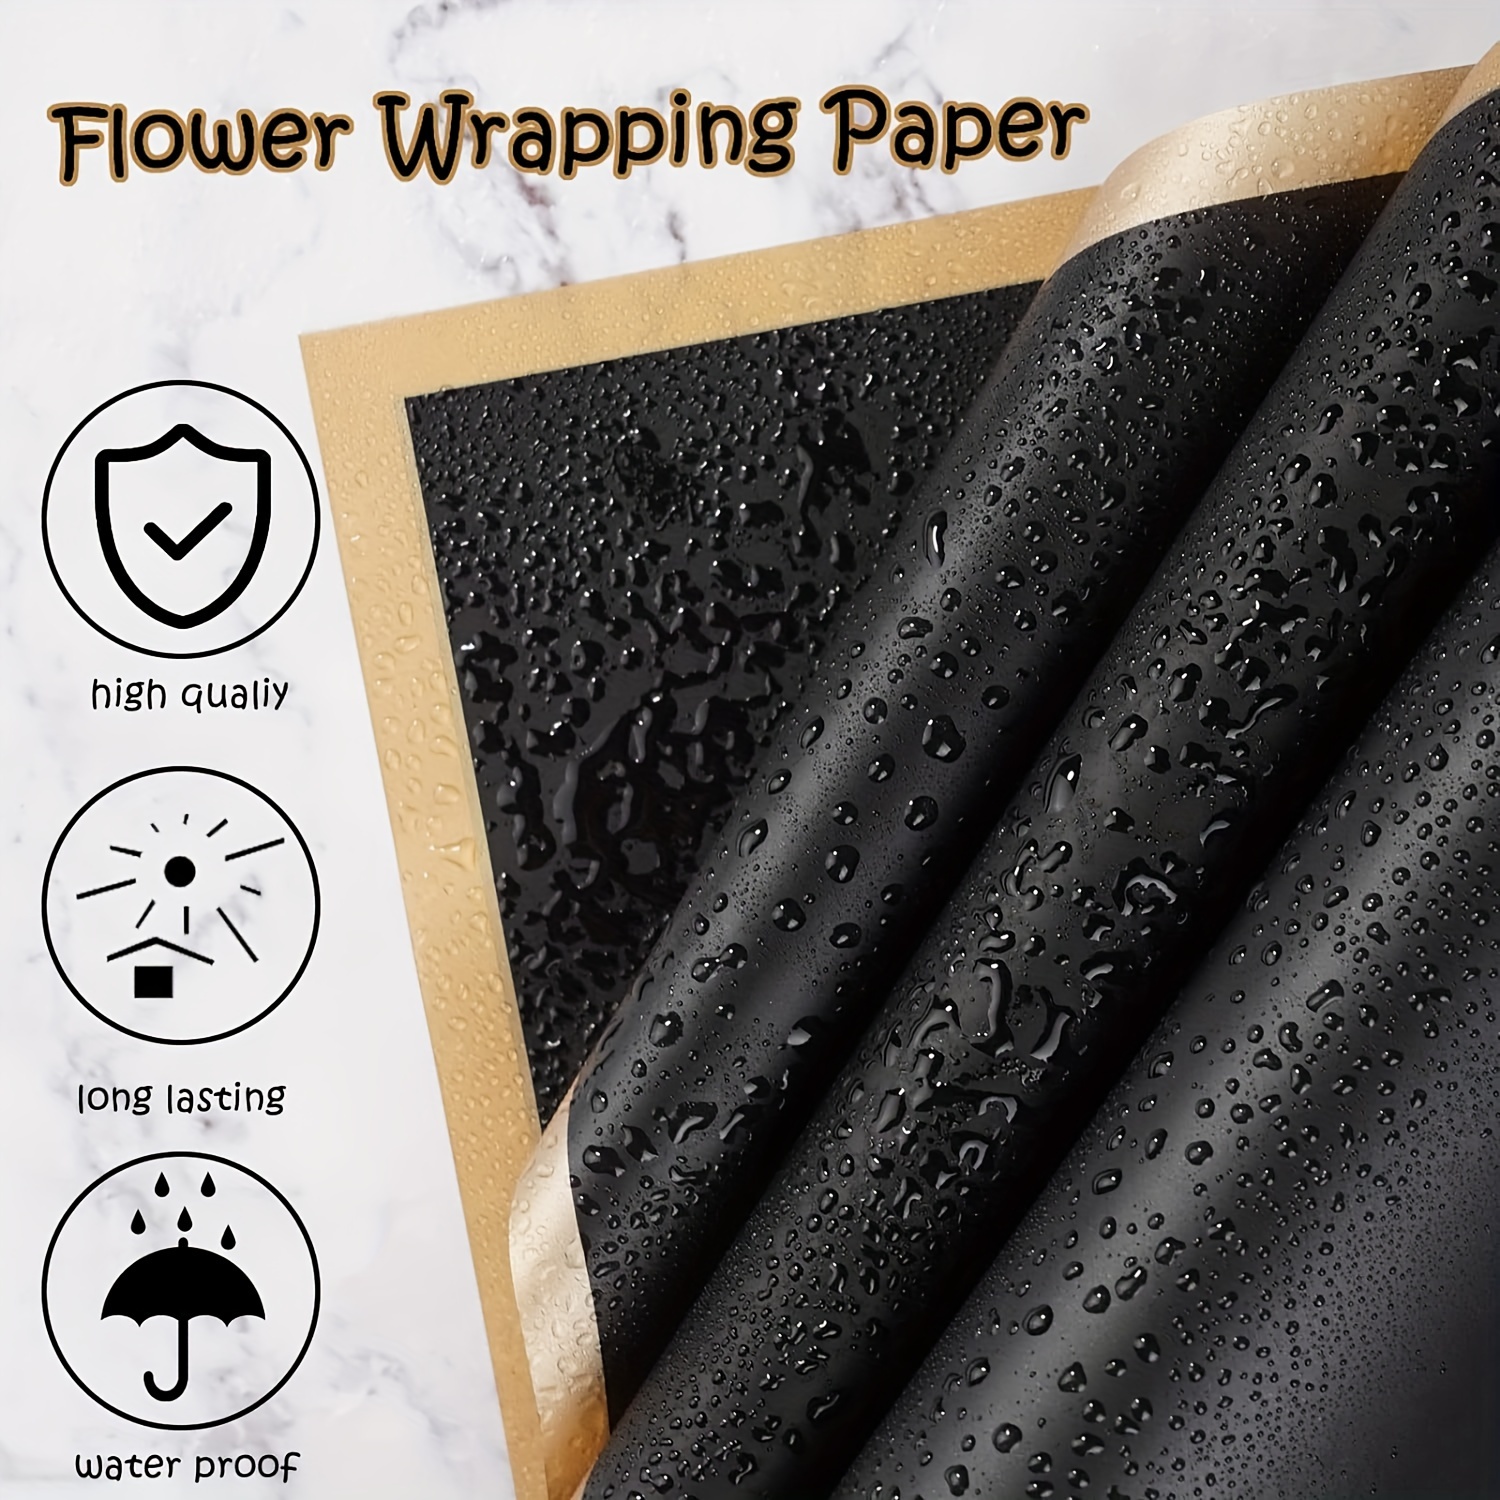 Dropship 20 Sheets Japanese Style Black Flower Wrapping Paper Bouquet Floral  Wraps Supplies to Sell Online at a Lower Price